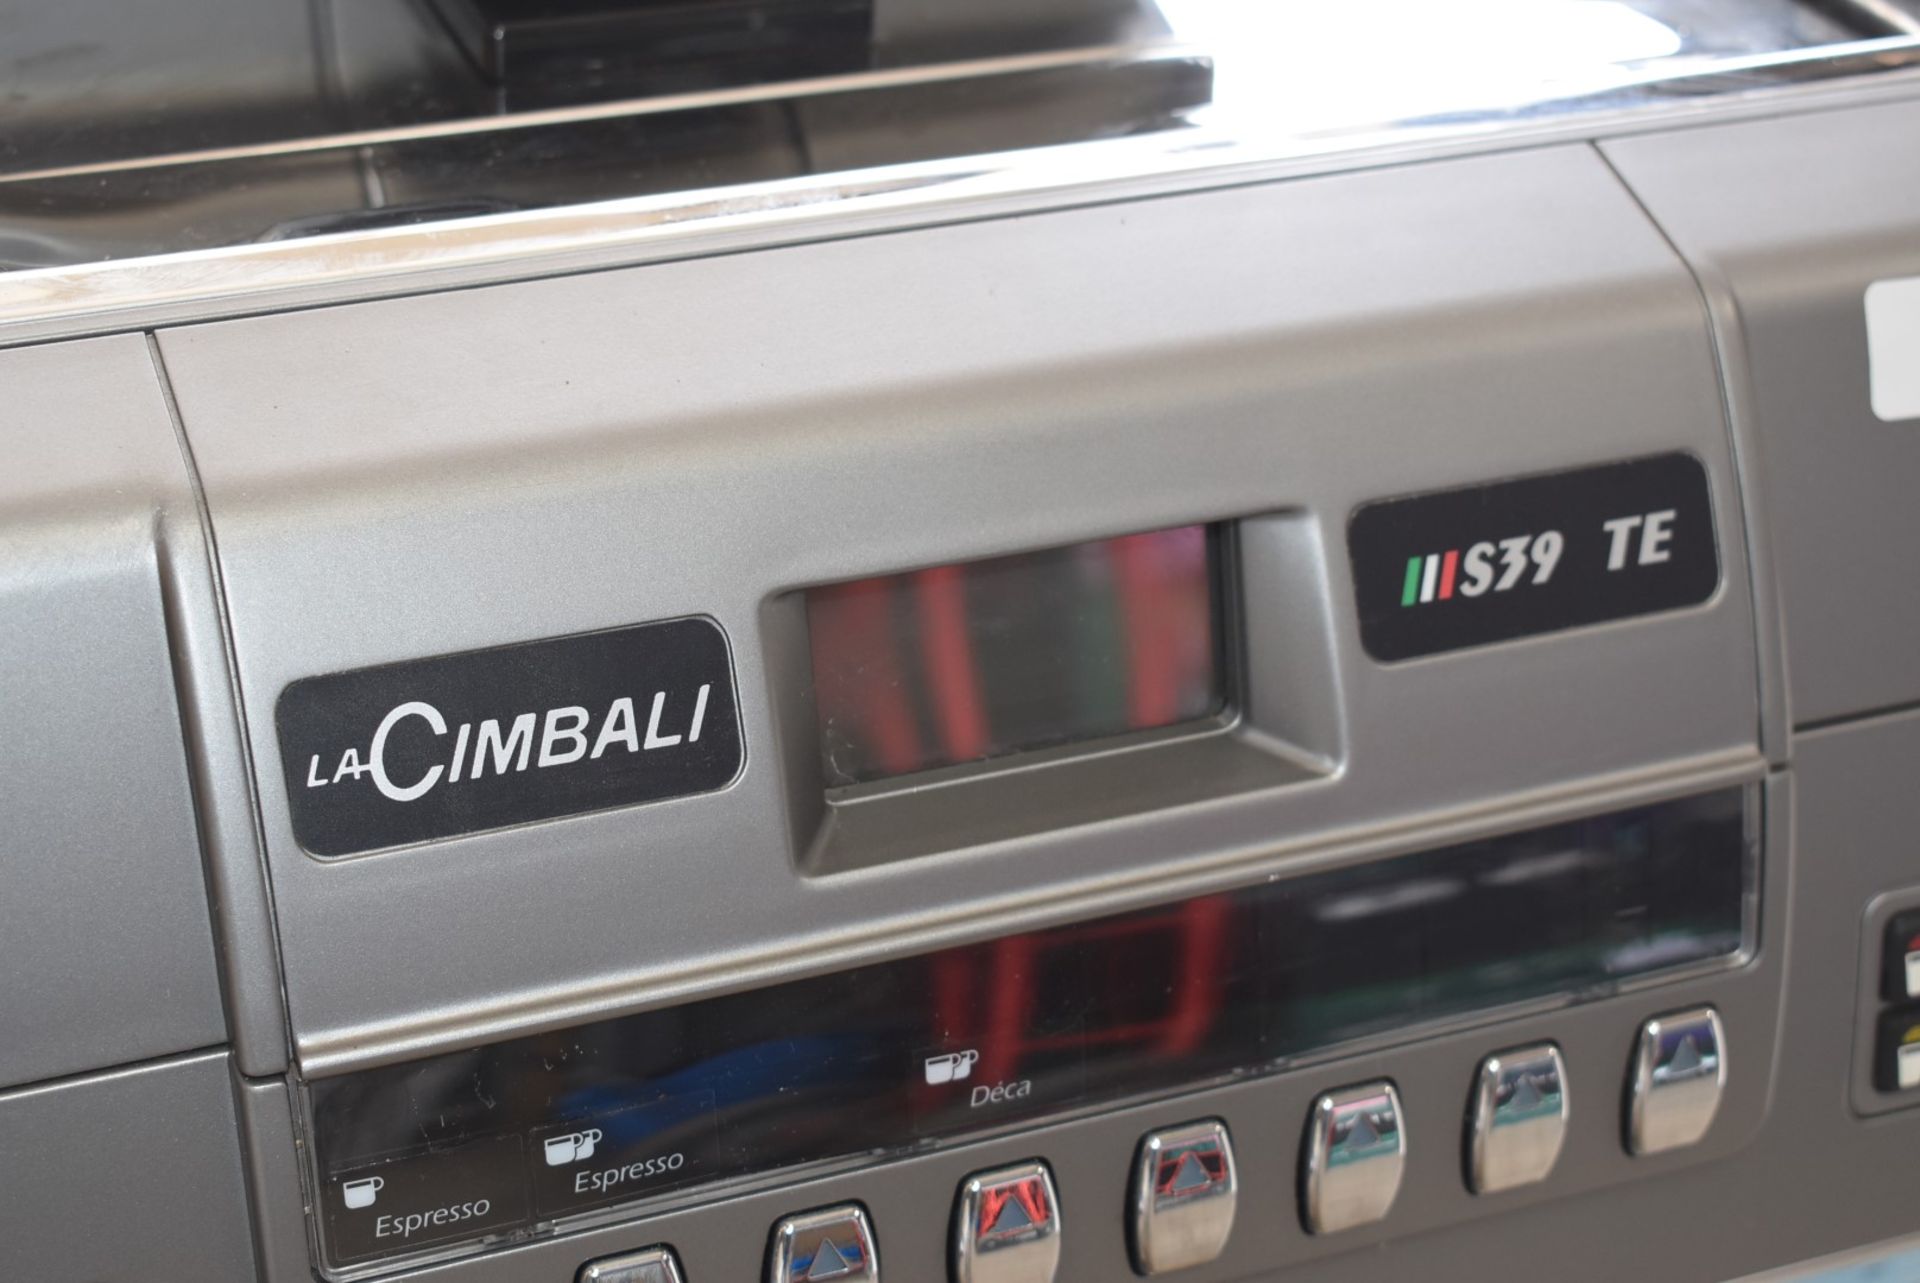 1 x La Cimbali S39 TE Combined Automatic Bean to Cup Coffee Machine - 2017 Model - RRP £10,245 - Image 14 of 22